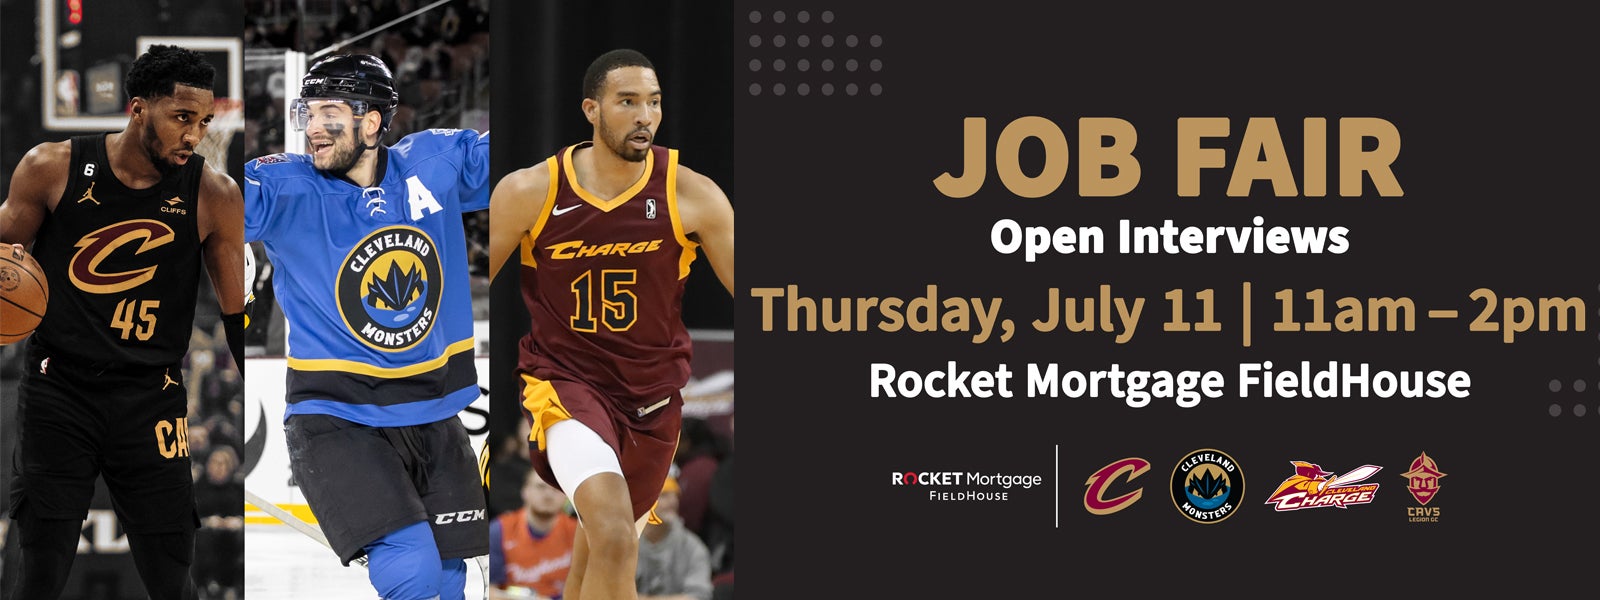 Job Fair at Rocket Mortgage FieldHouse on Thursday, July 11th | Open Interviews Available from 11:00 AM to 2:00 PM